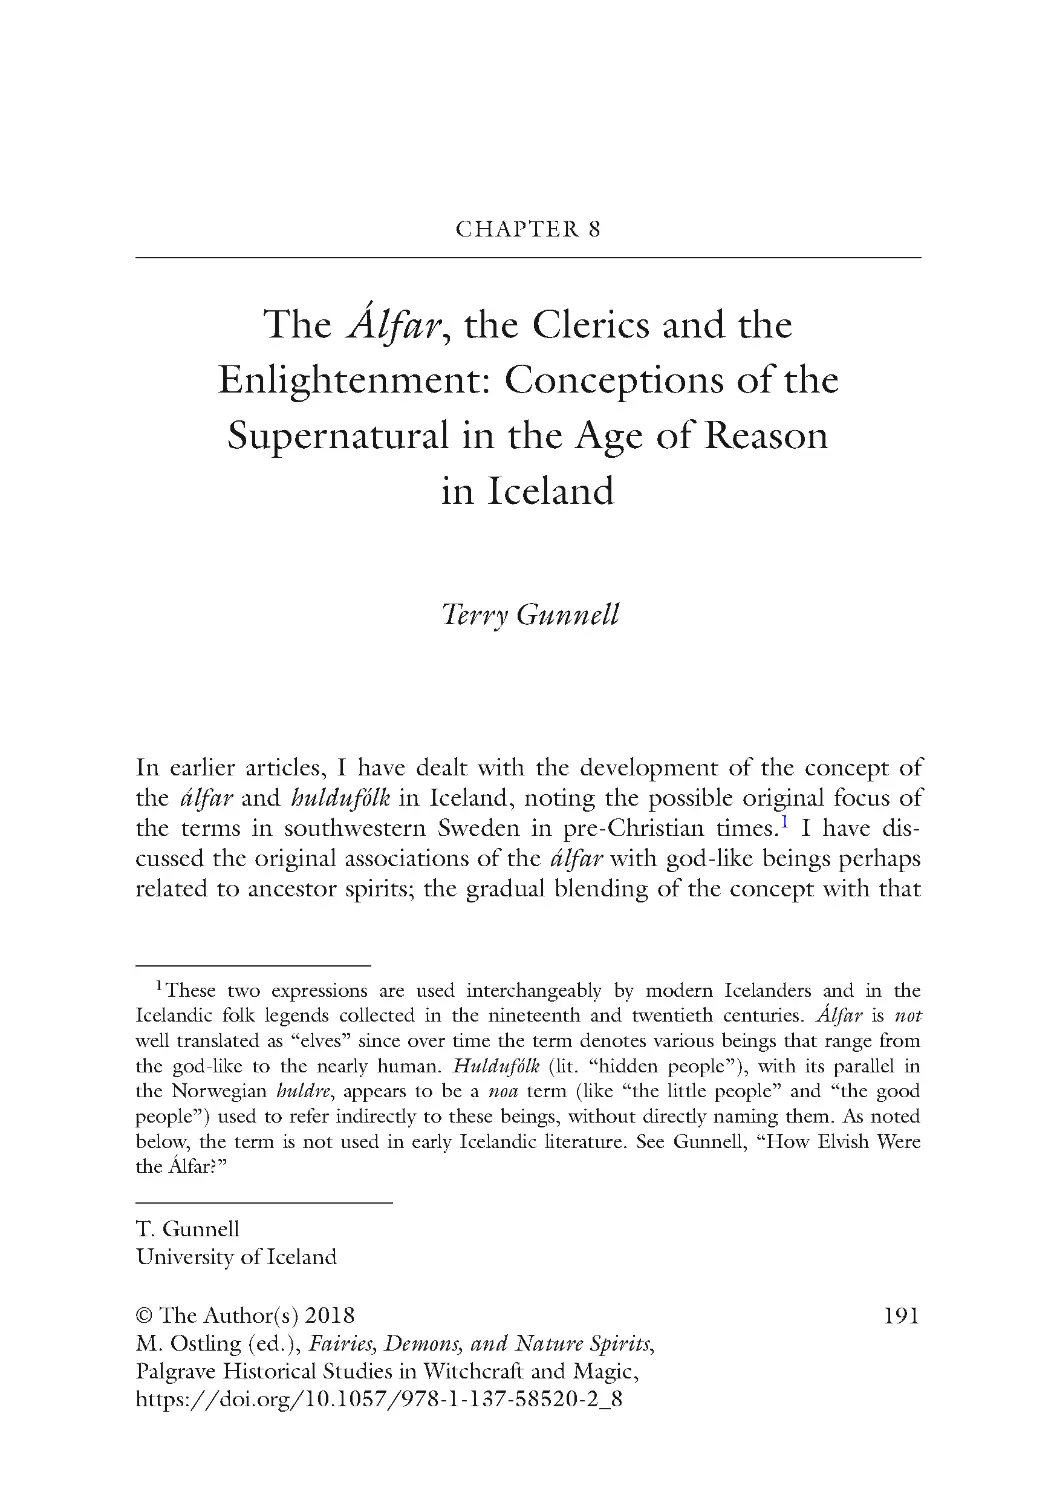 Chapter 8 The Álfar, the Clerics and the Enlightenment: Conceptions of the Supernatural in the Age of Reason in Iceland